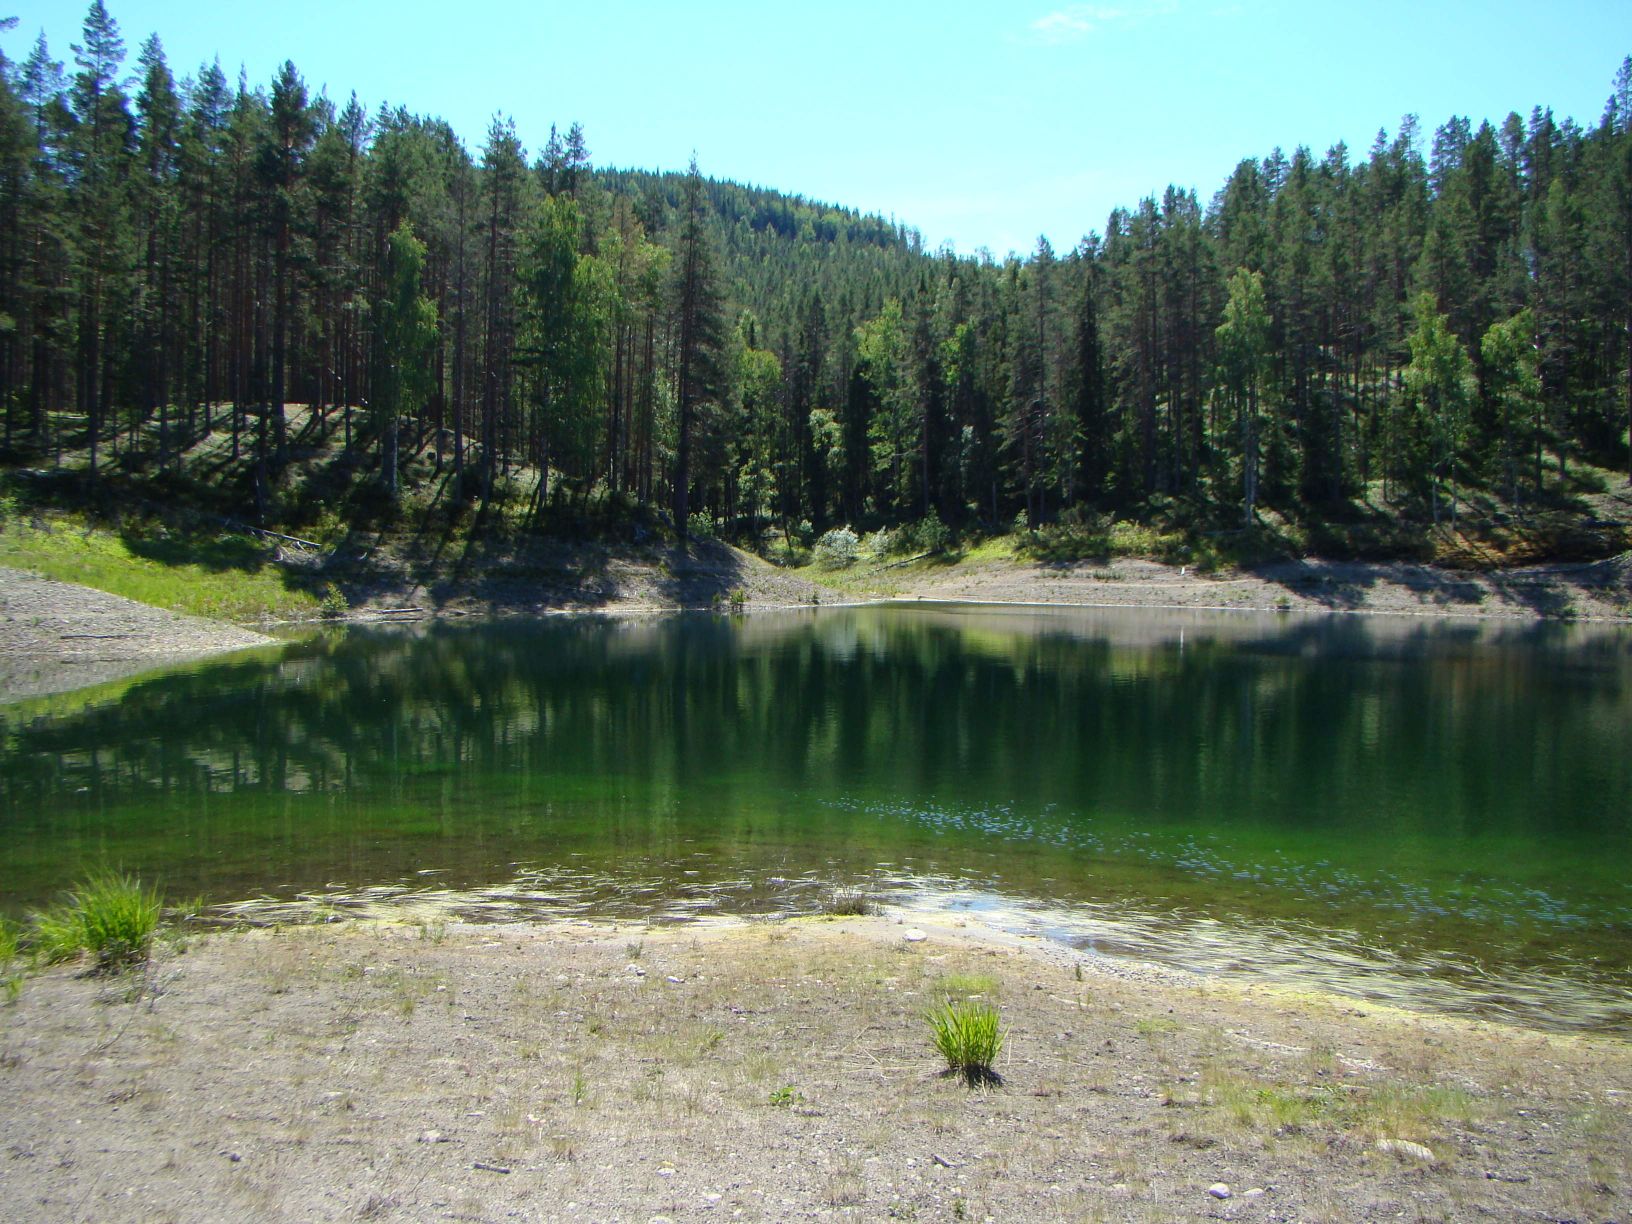 Gröntjärn - a green lake deep in the forest of pines and spruces